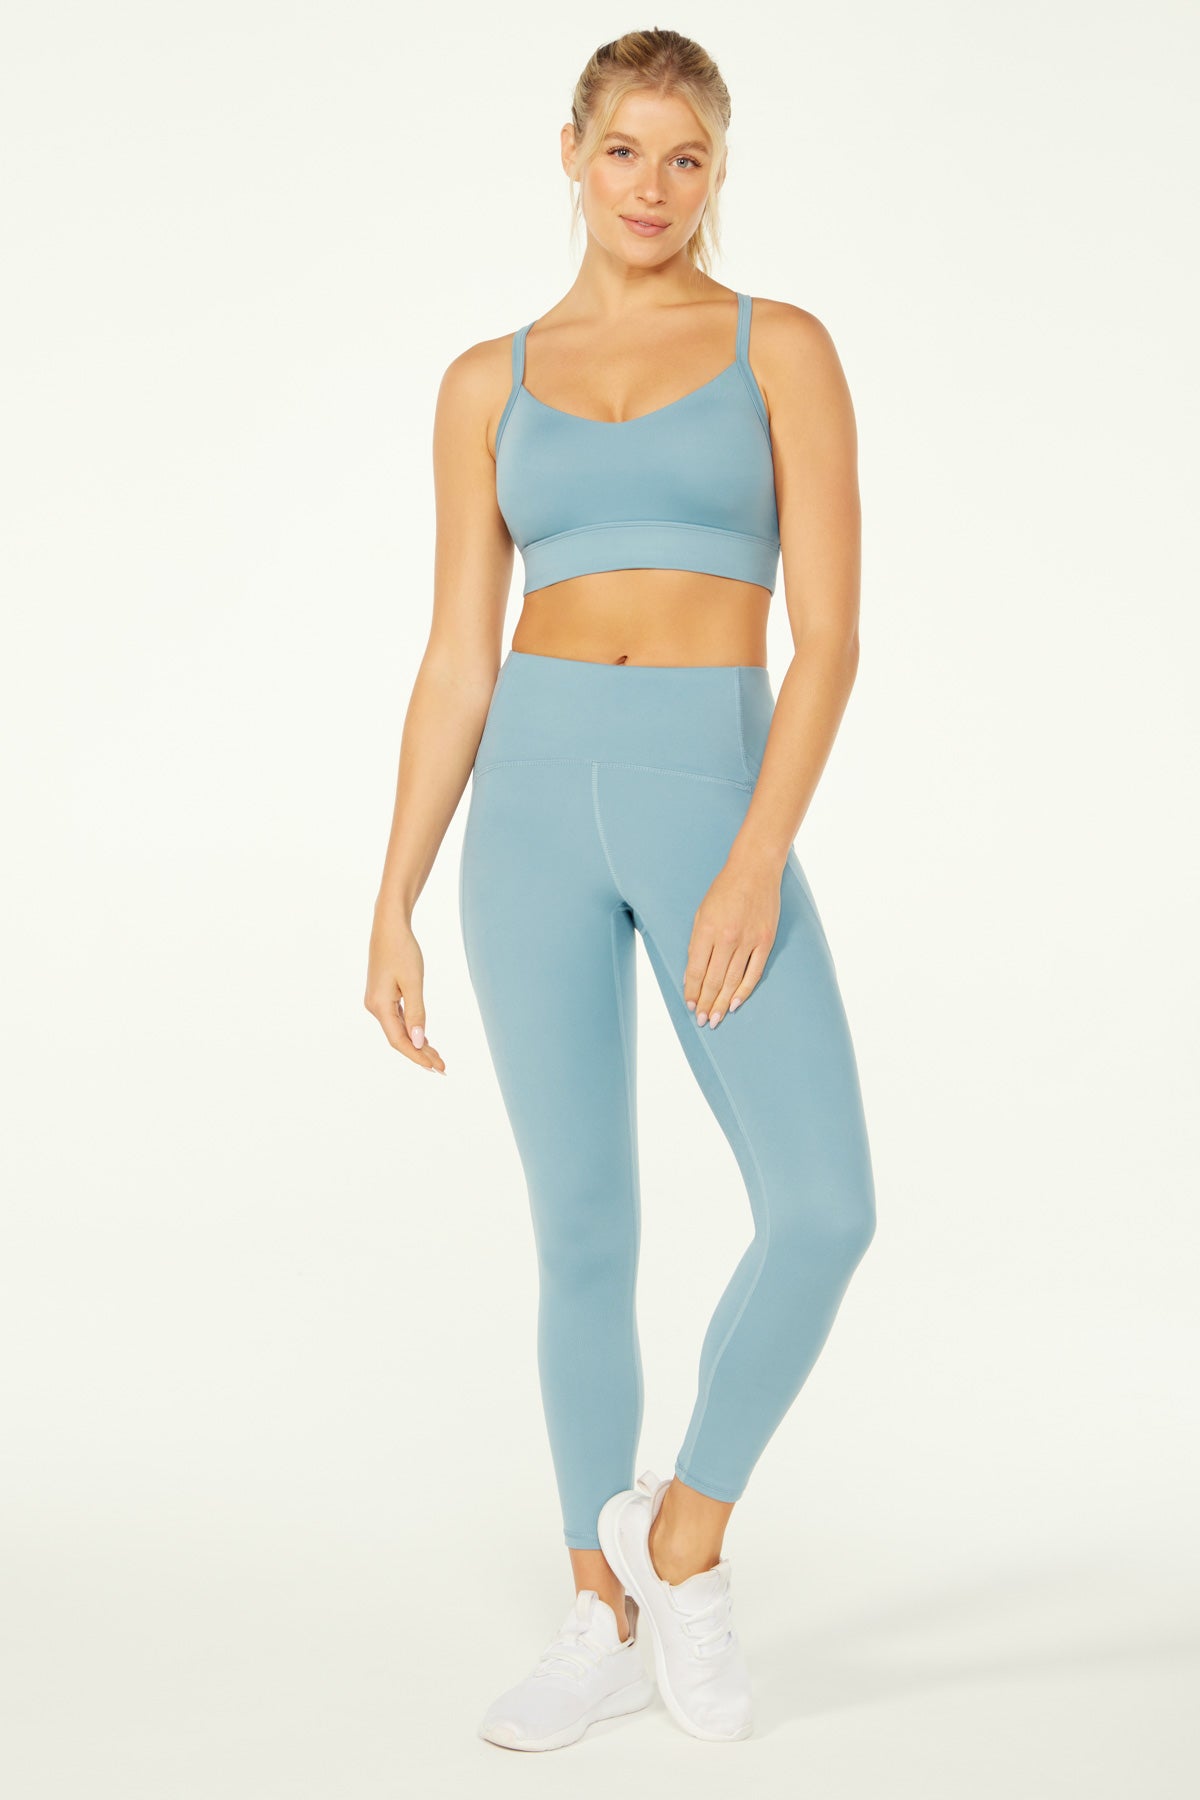 OBEEII Yoga Outfit For Women 3 Pieces Set Sports Bra Fashion Yoga Outfit  Casual Sports Wear S Light Blue 